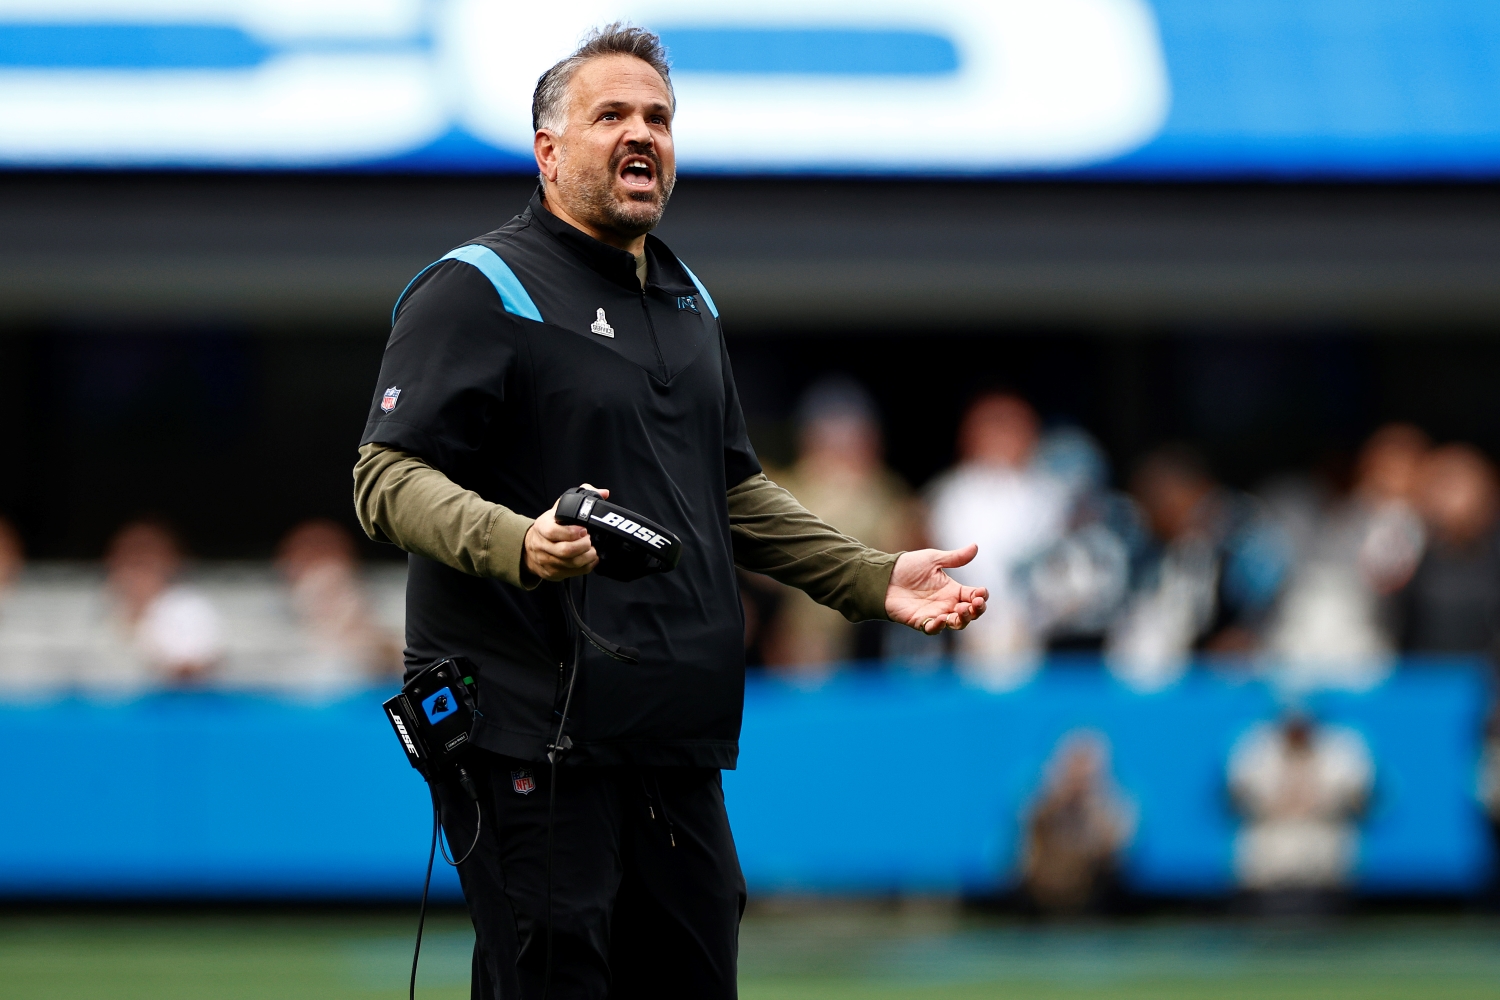 Carolina Panthers head coach Matt Rhule reacts to a play during a game against the Washington Football Team.